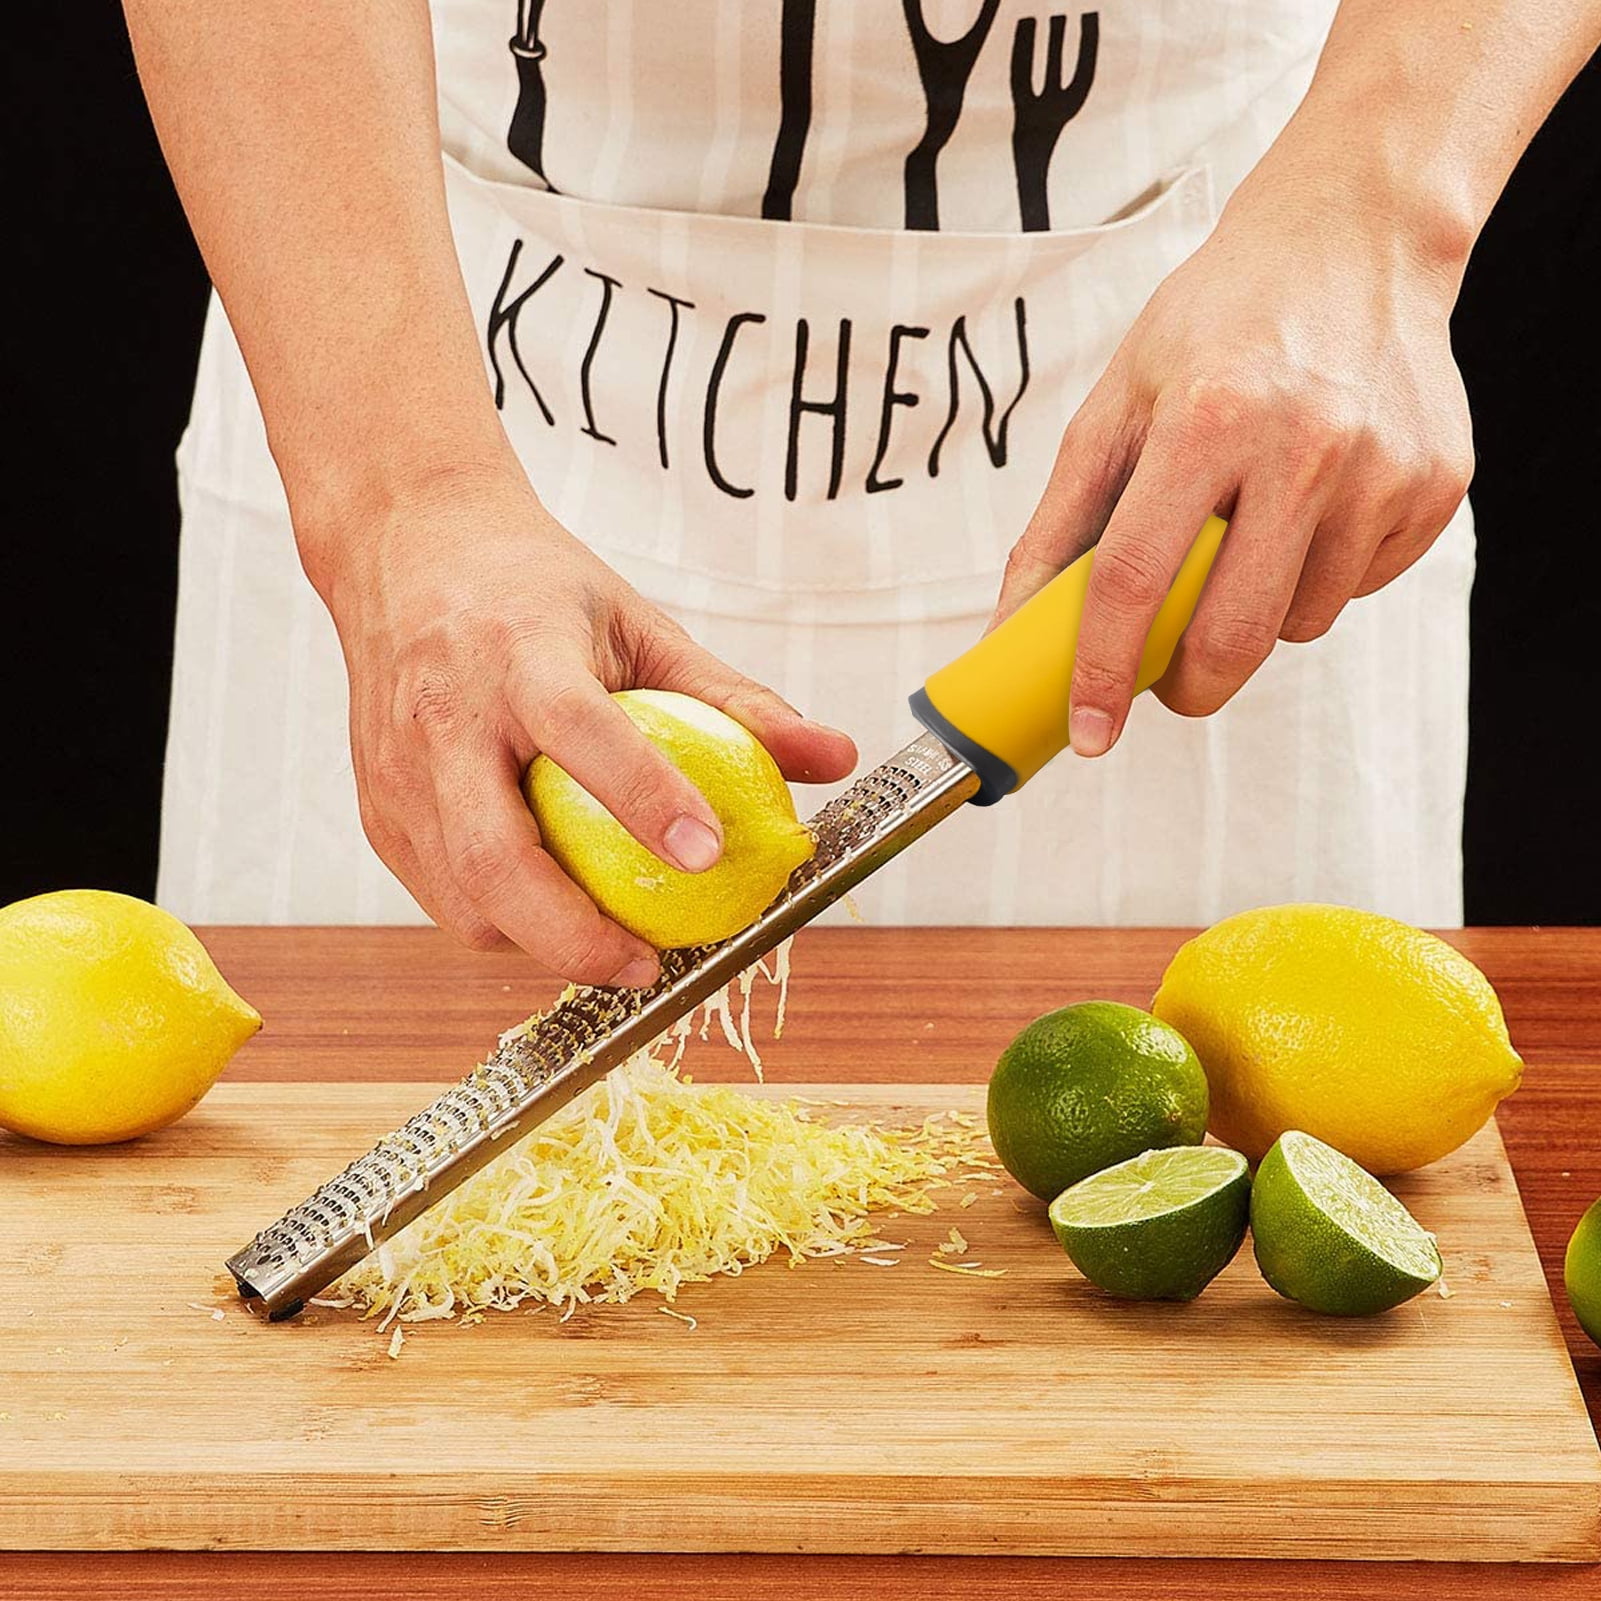 Urbanstrive Cheese Grater with Handle, Lemon Zester Graters for Kitchen Stainless Steel, Hand Grater for Ginger Garlic Nutmeg Chocolate Fruits